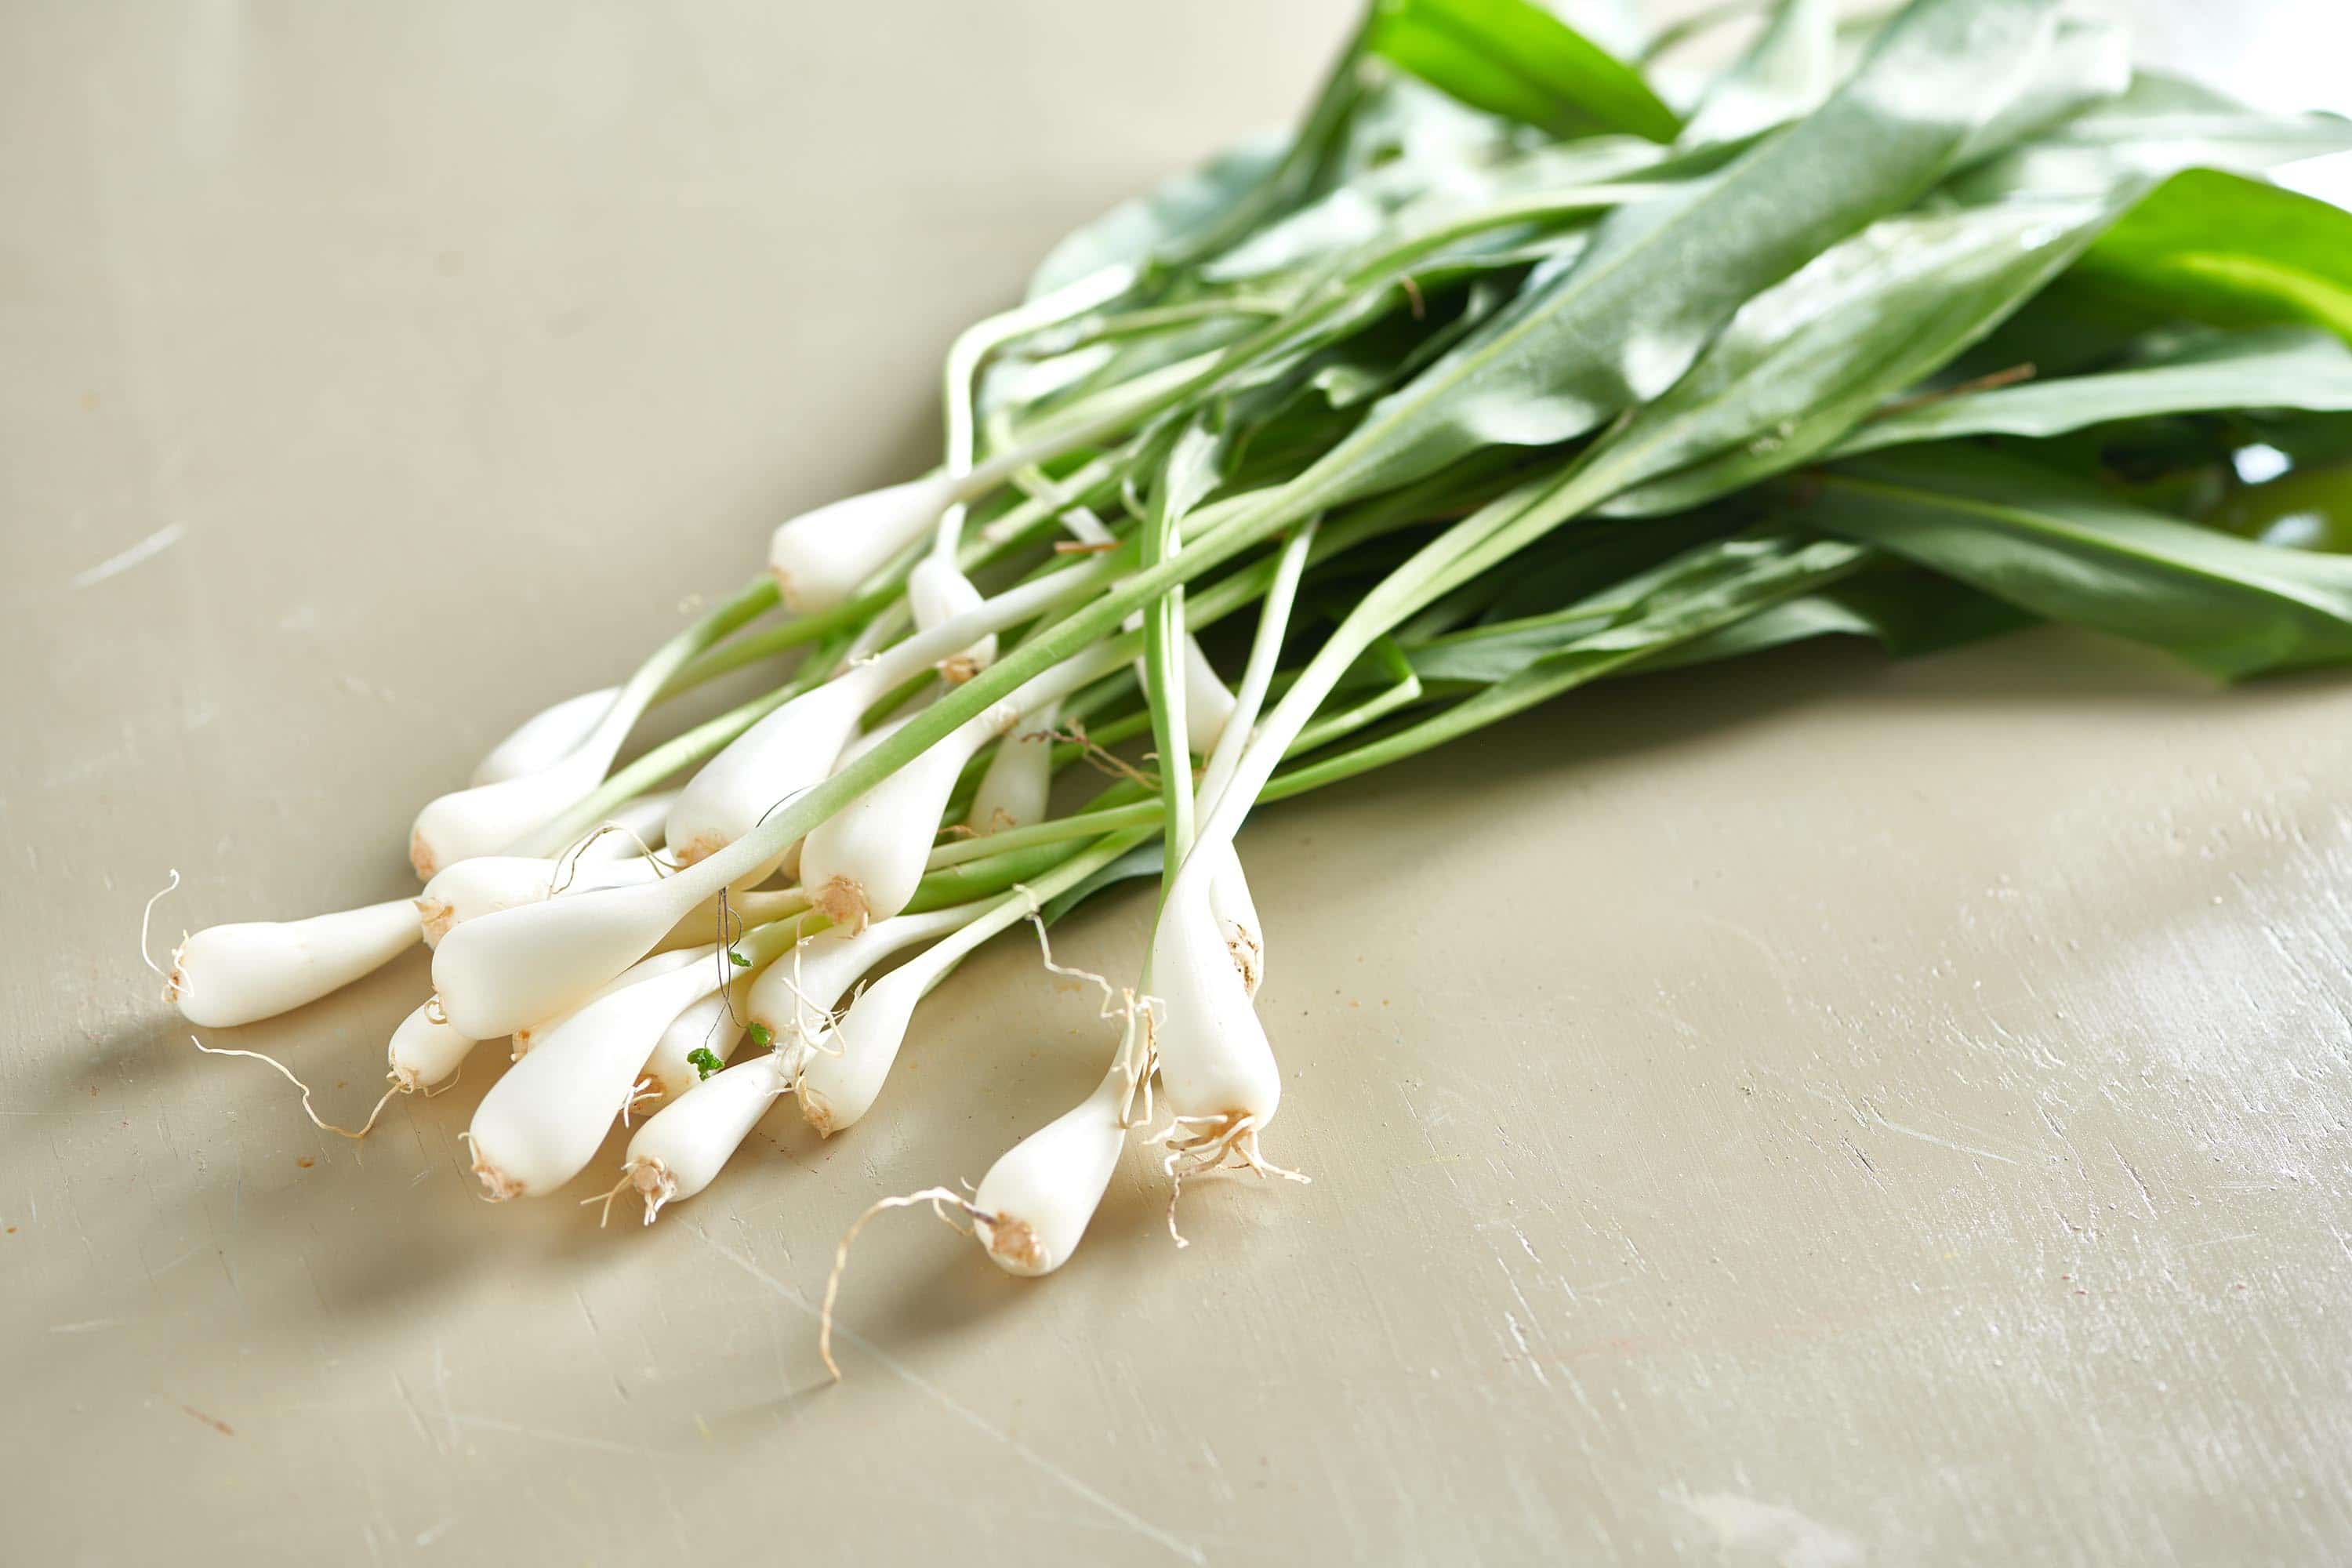 Pile of freshly picked spring ramps on countertop.